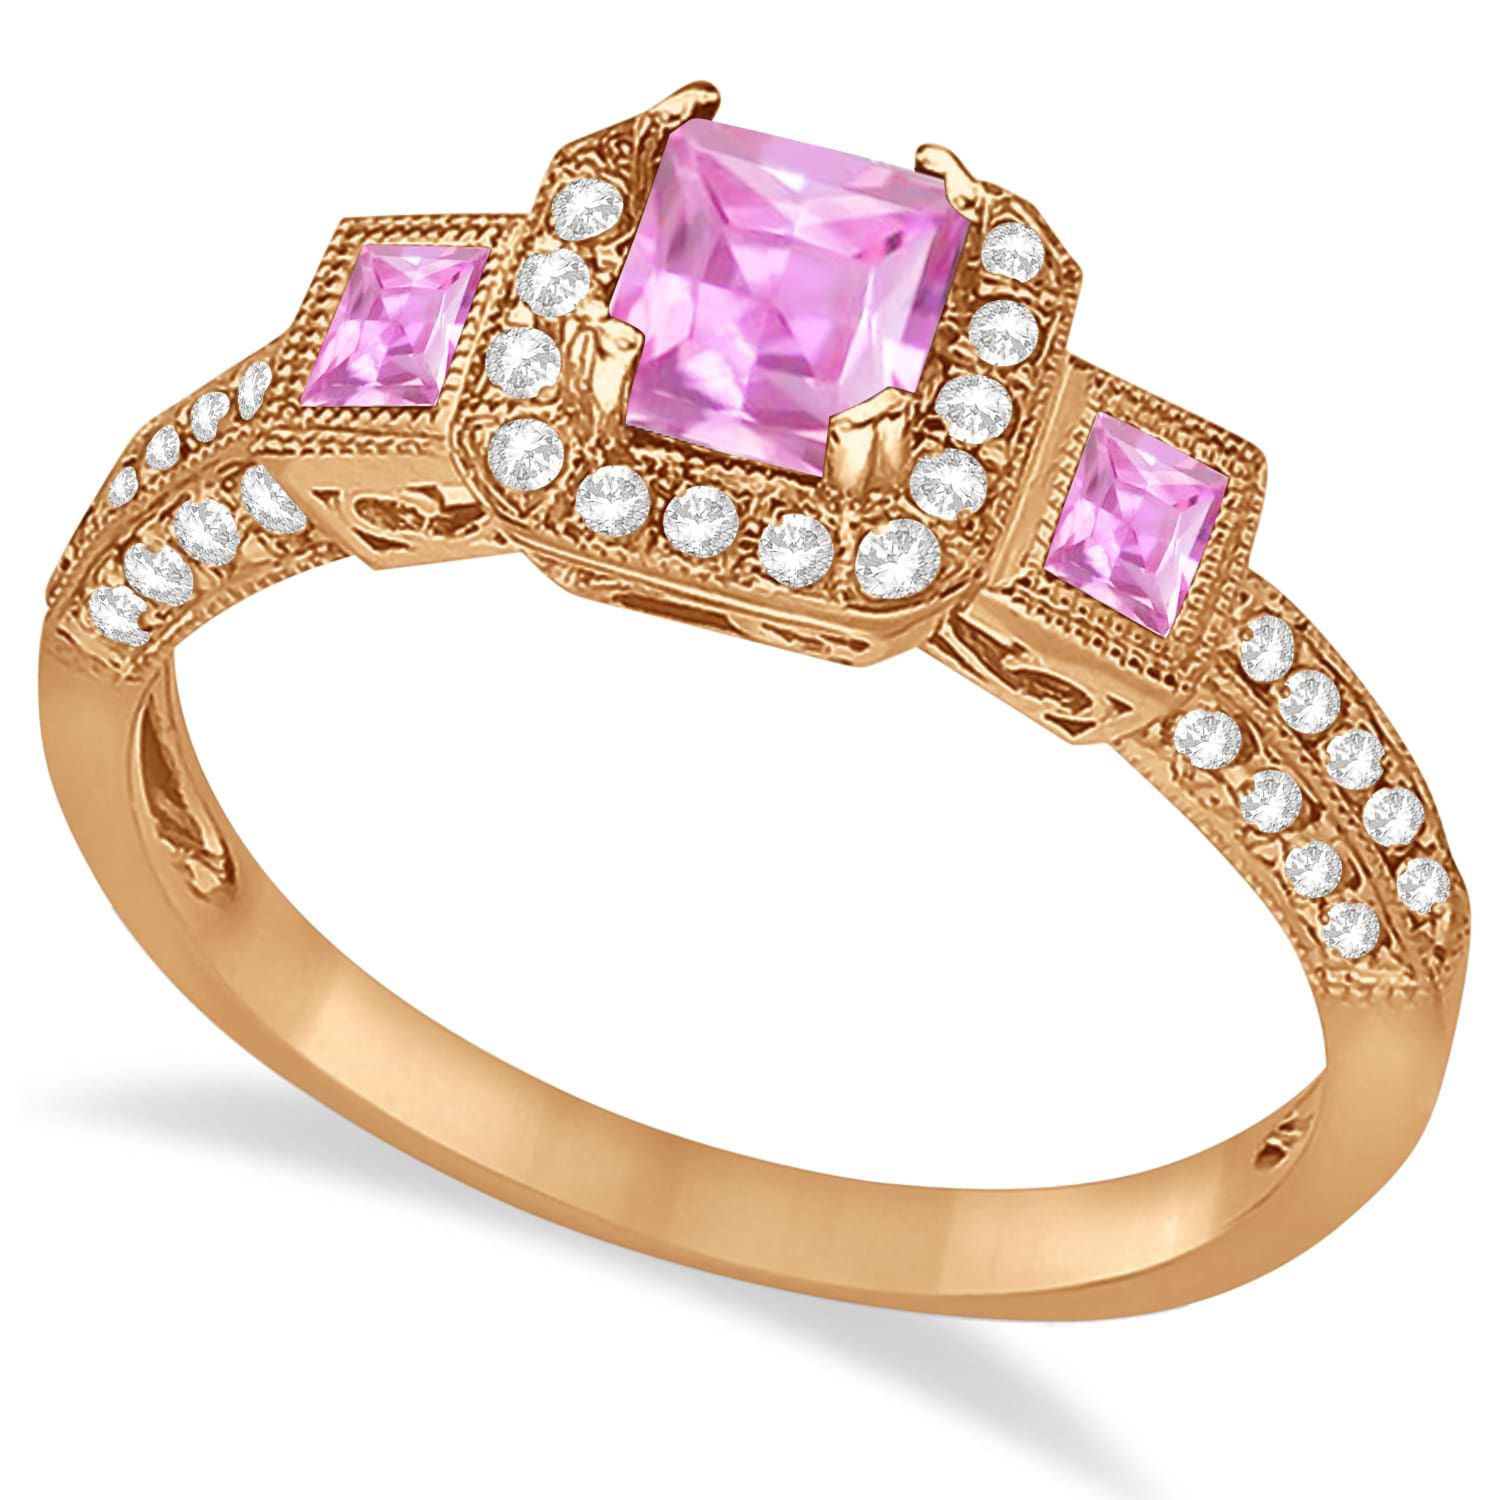 Pink Sapphire & Diamond Engagement Ring in 14k Rose Gold (1.35ctw)